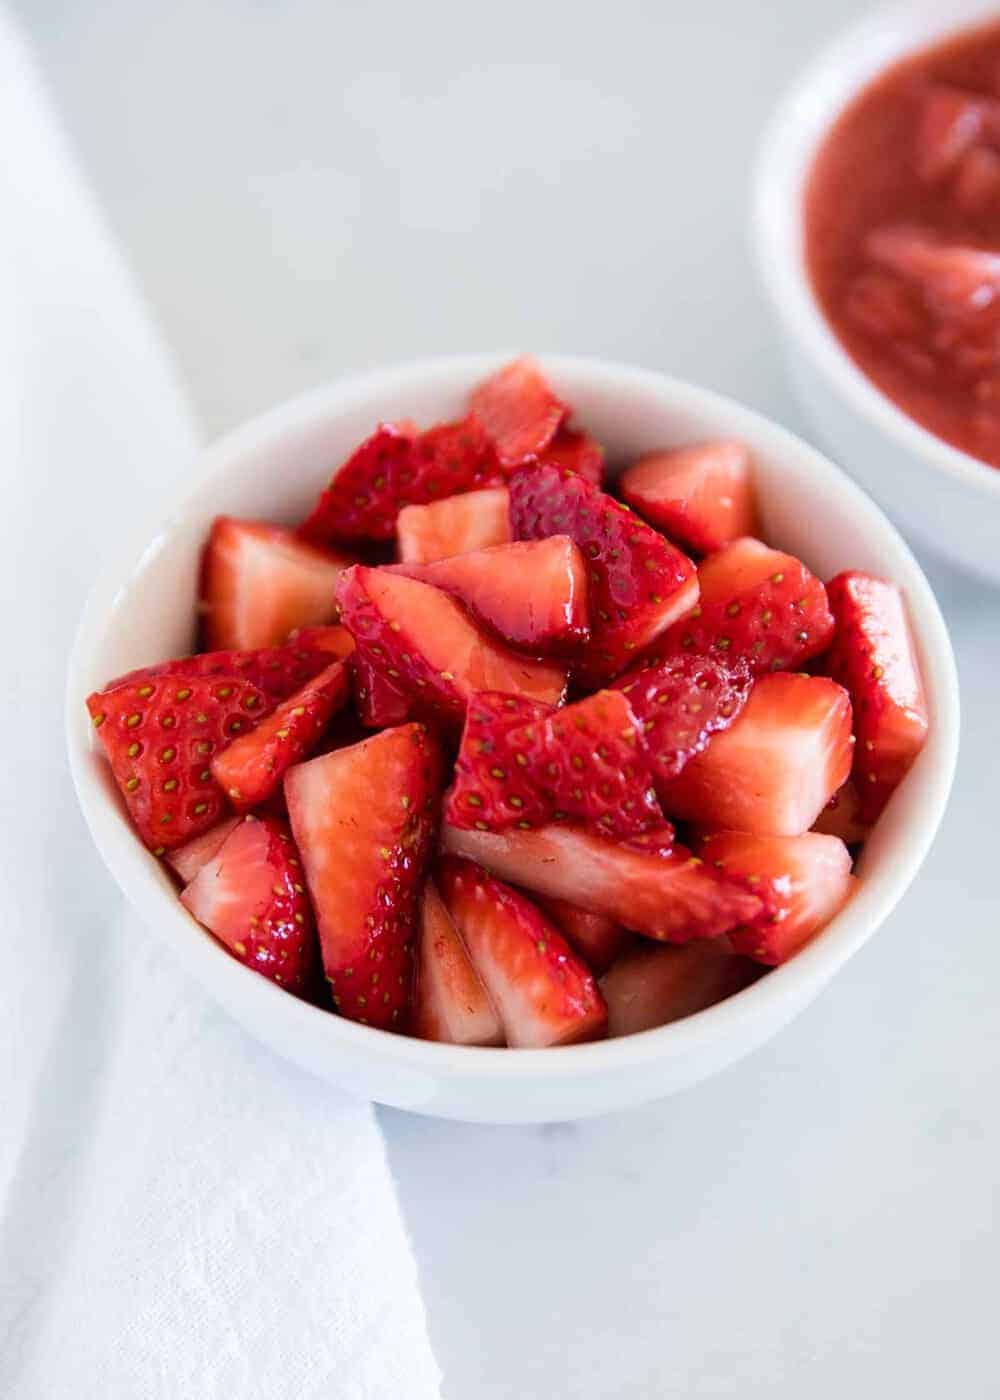 Strawberries in a bowl.